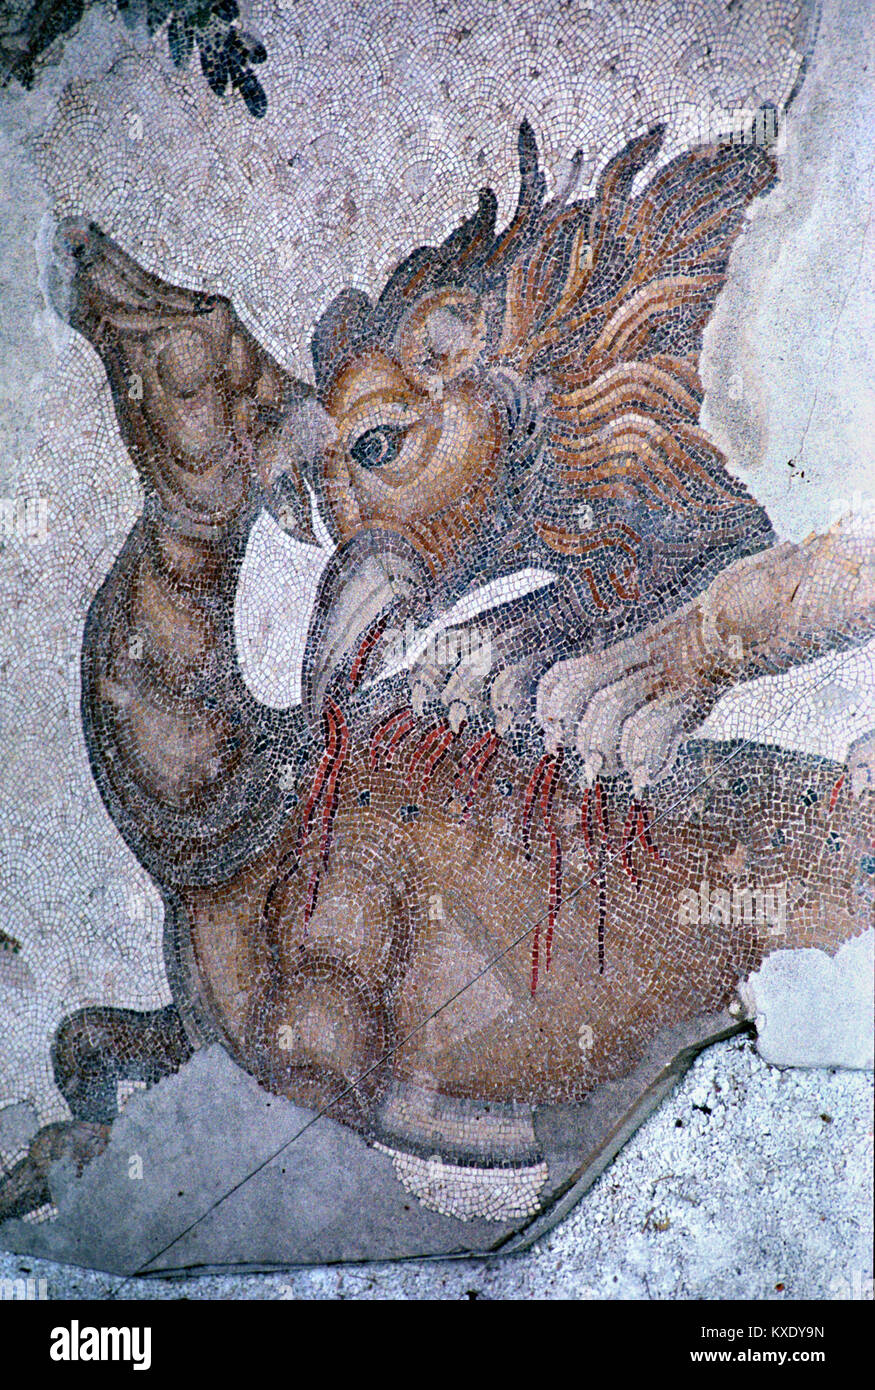 Byzantine Floor Mosaic of Griffin, Griffon or Gryphon Attacking a Deer from the former Byzantine Great Palace c5th, Byzantium, Istanbul, Turkey Stock Photo